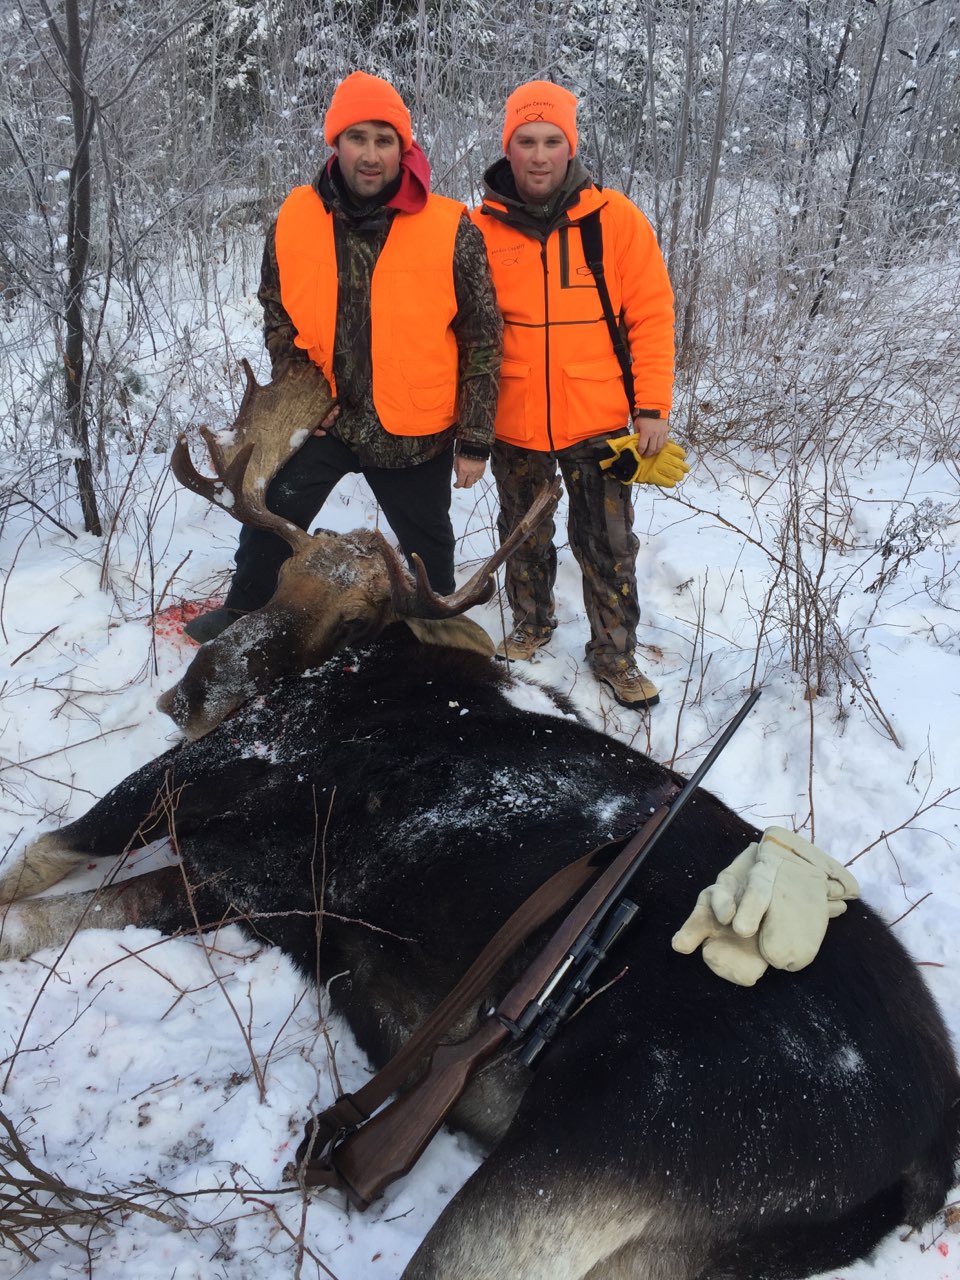 A photo of Roben Ogden and his son Jordan posing with a large bull moose.